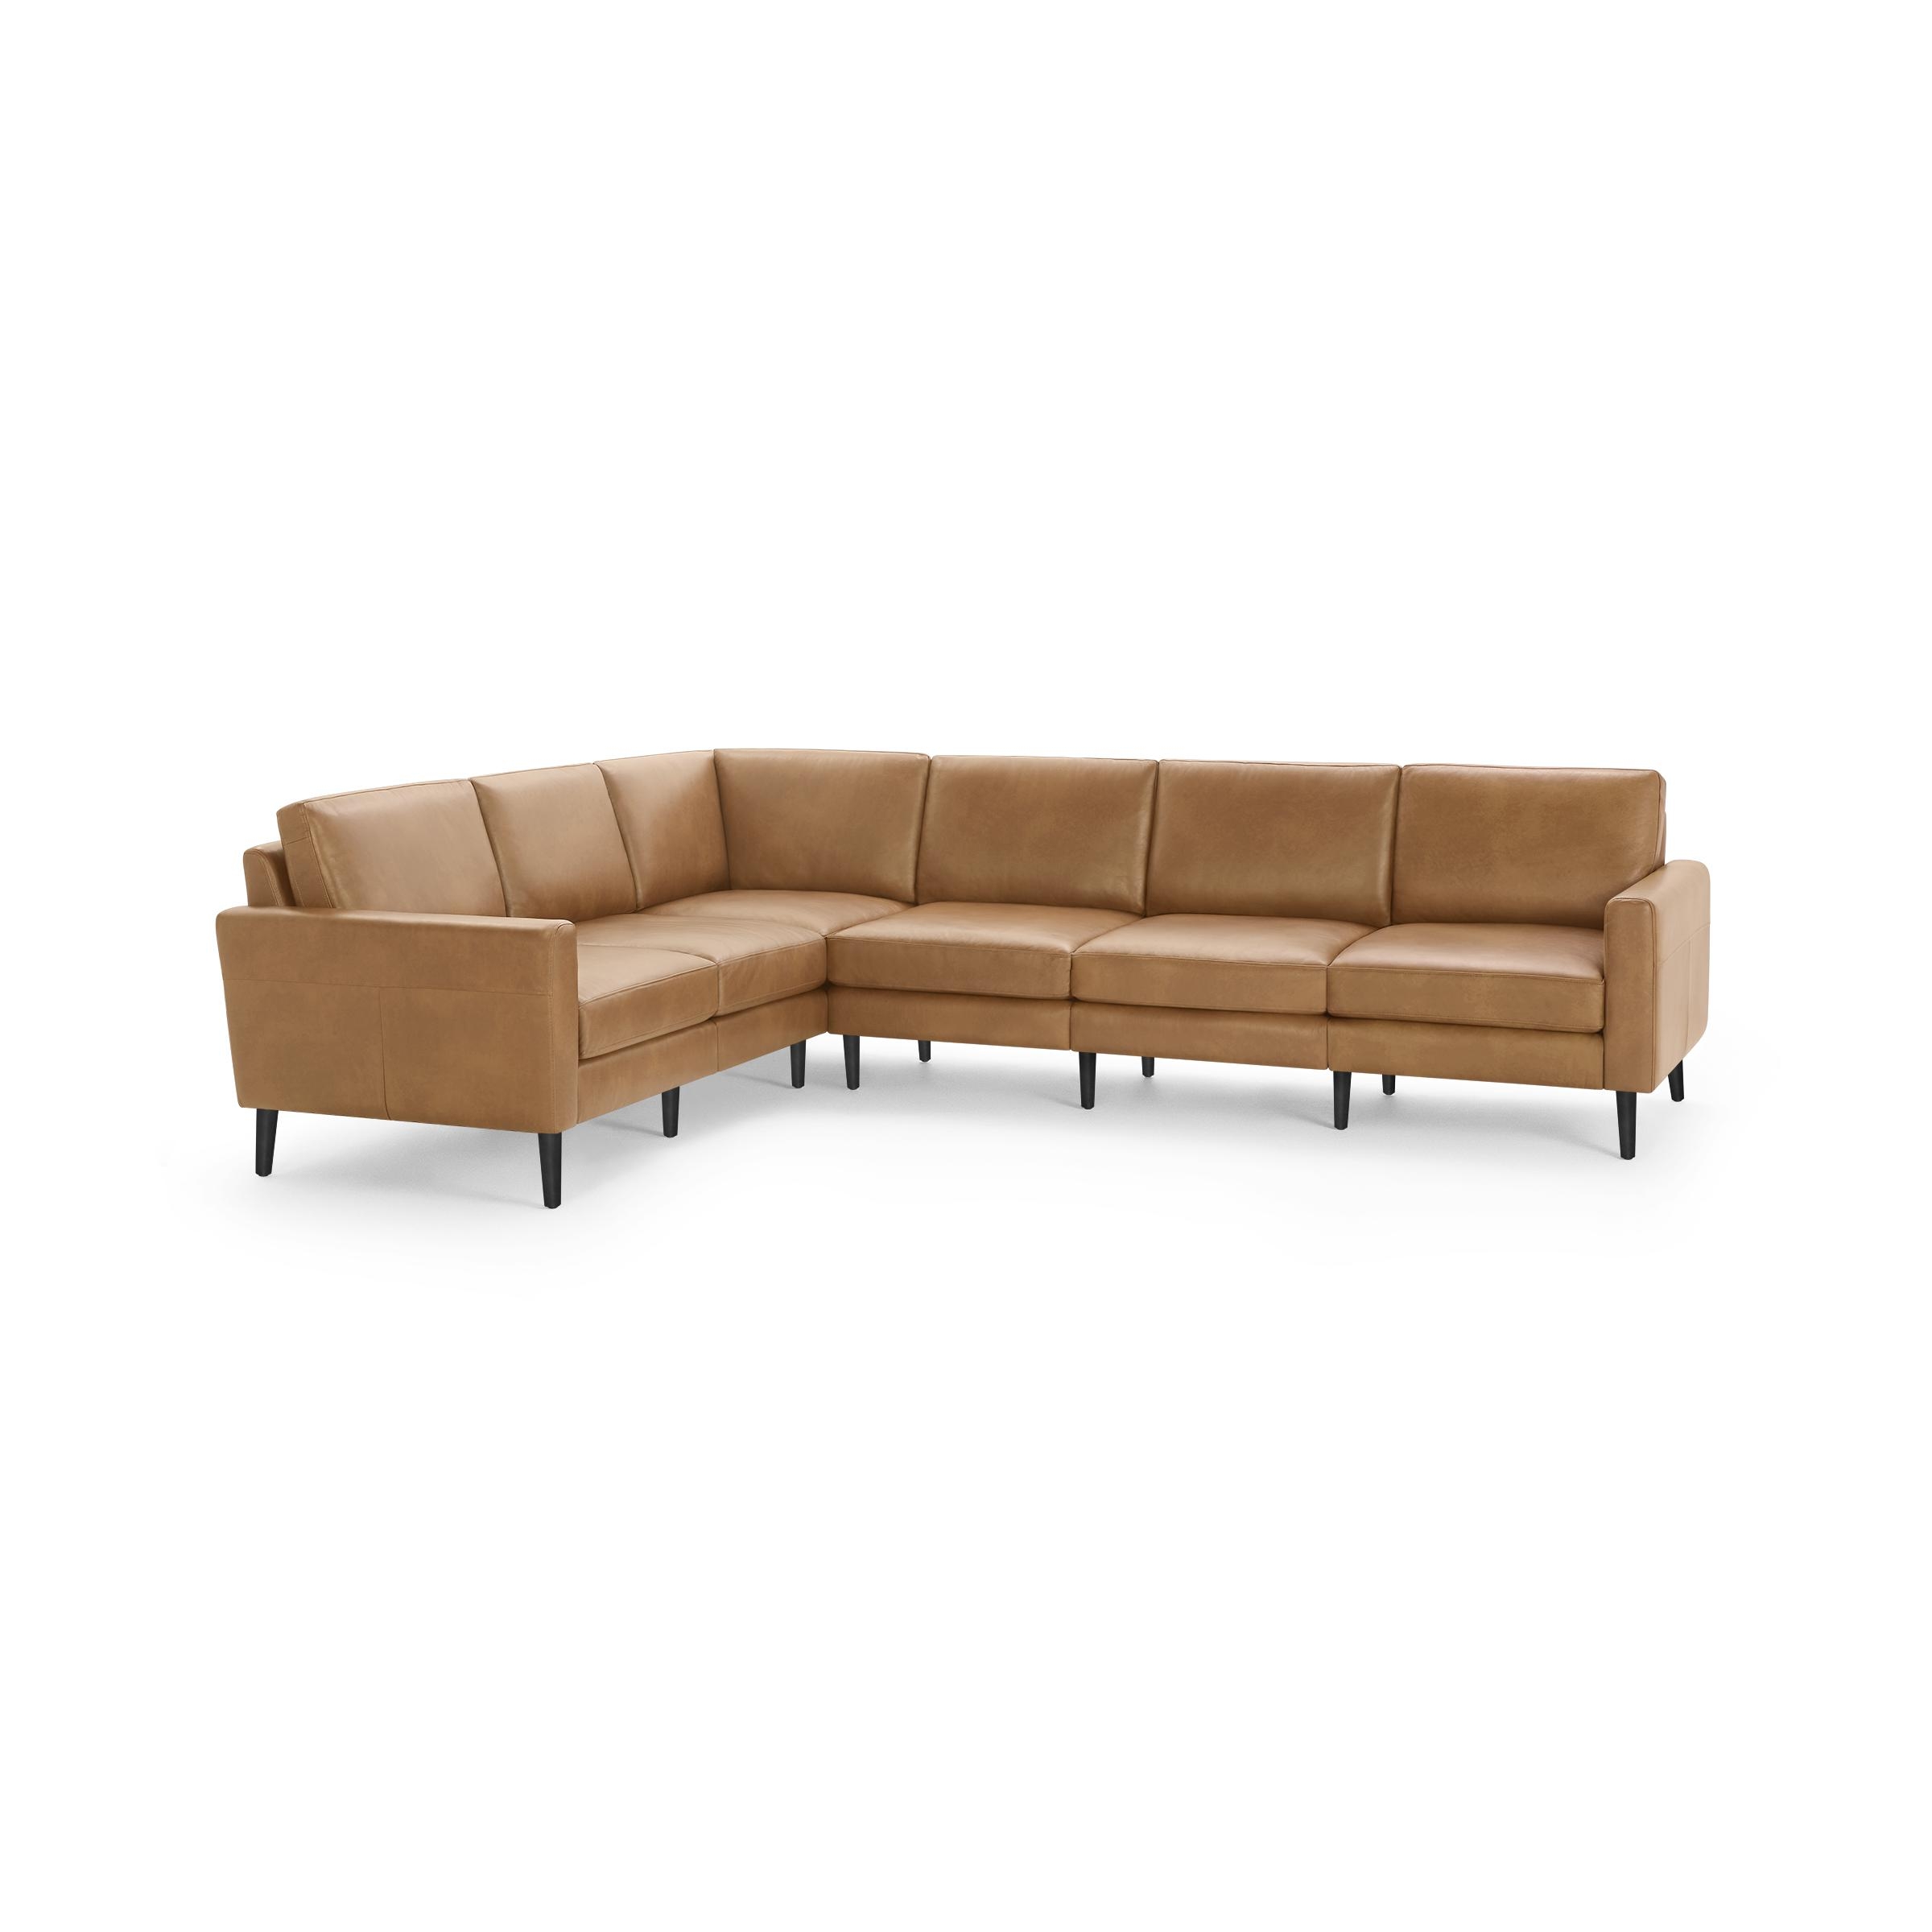 The Block Nomad Leather 6-Seat Corner Sectional in Camel, Ebony Legs - Image 1